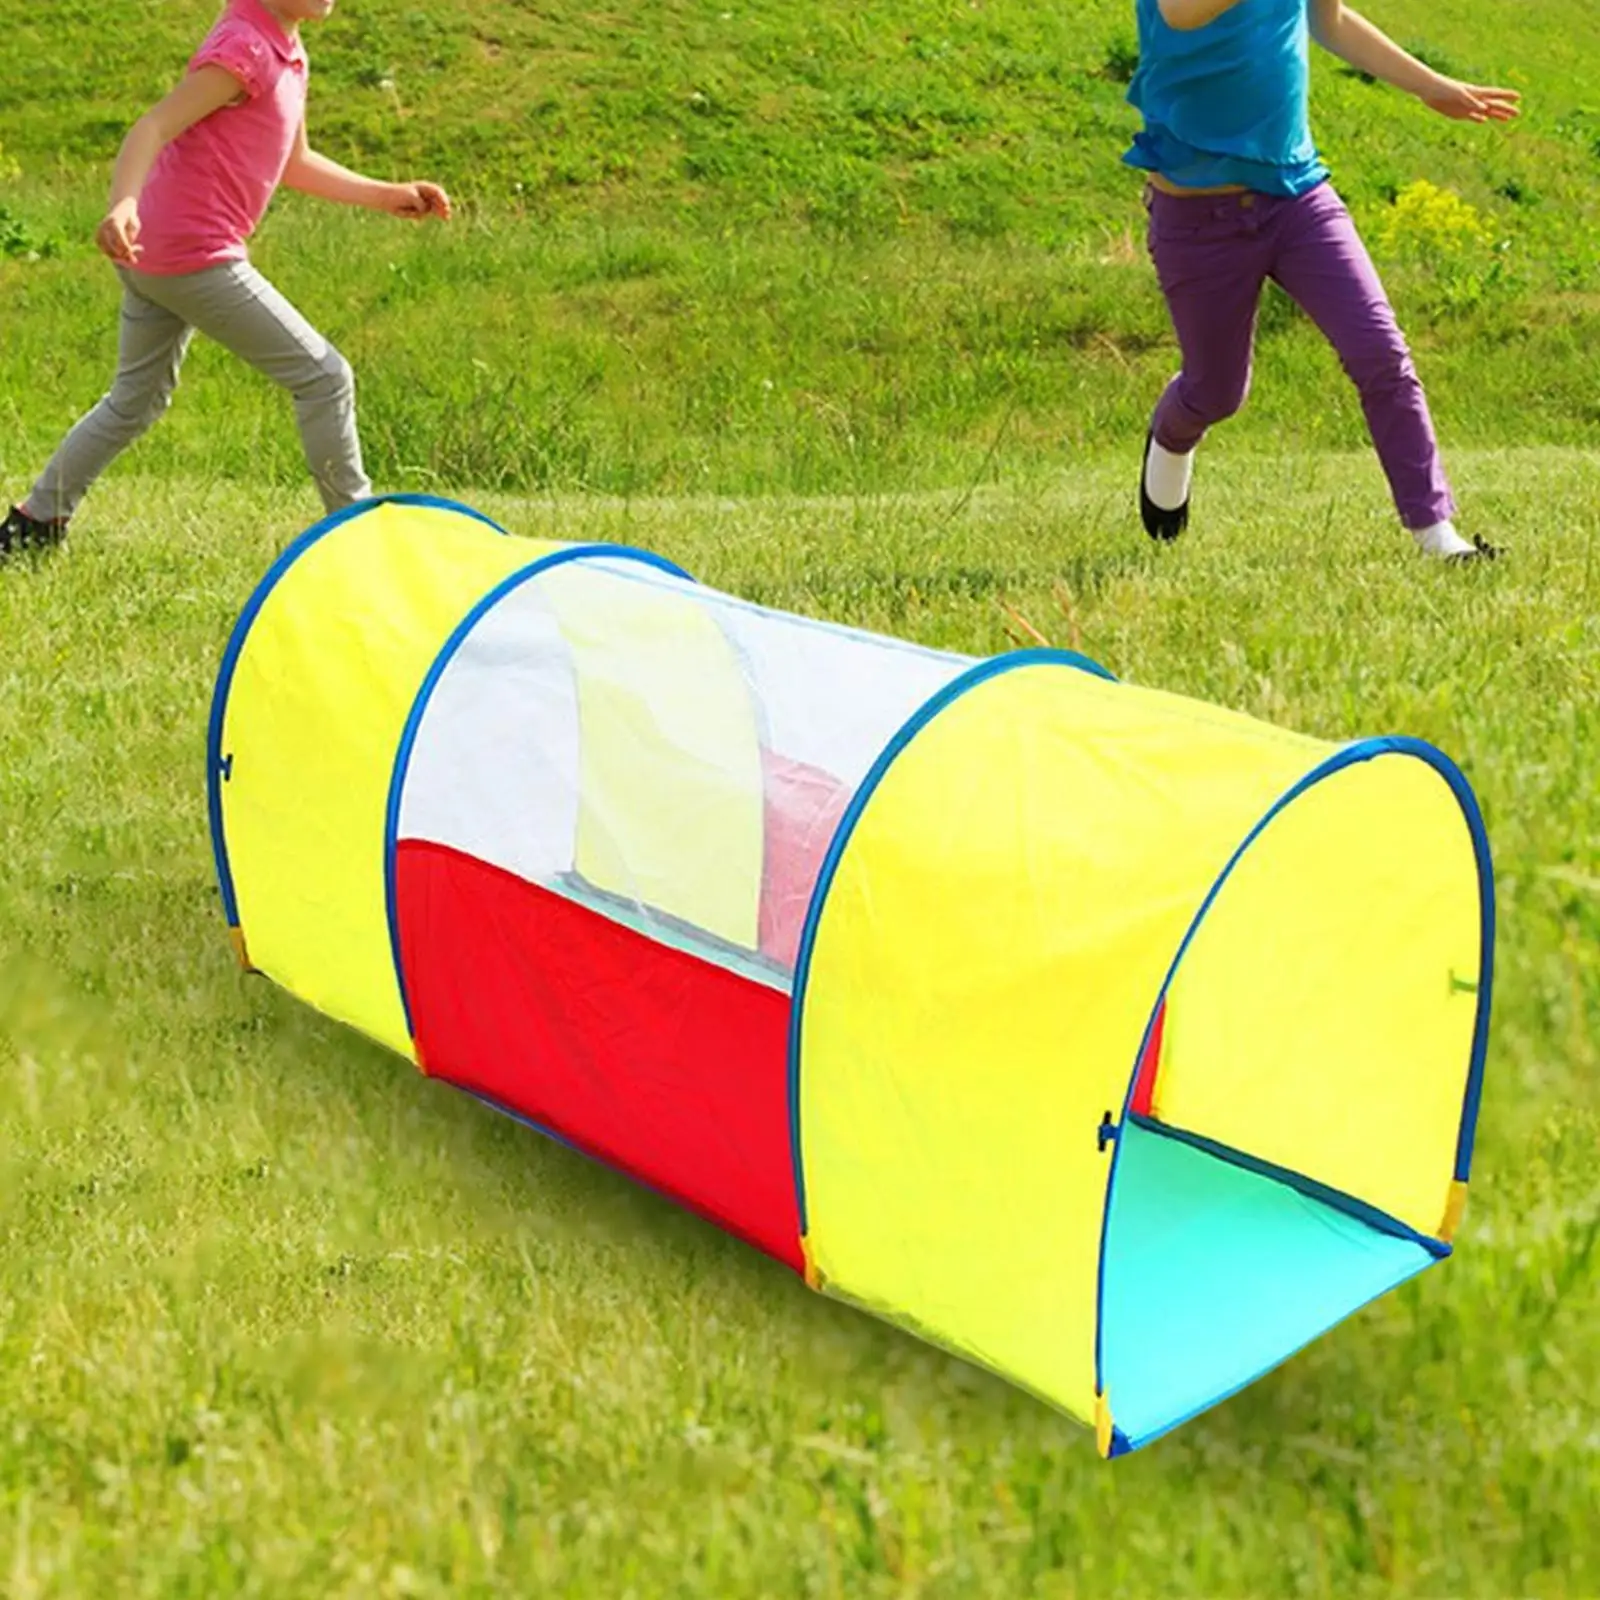 Kids Play Tunnel Tent Indoor Outdoor Toy Colorful Crawl Tunnel Toy for Boys